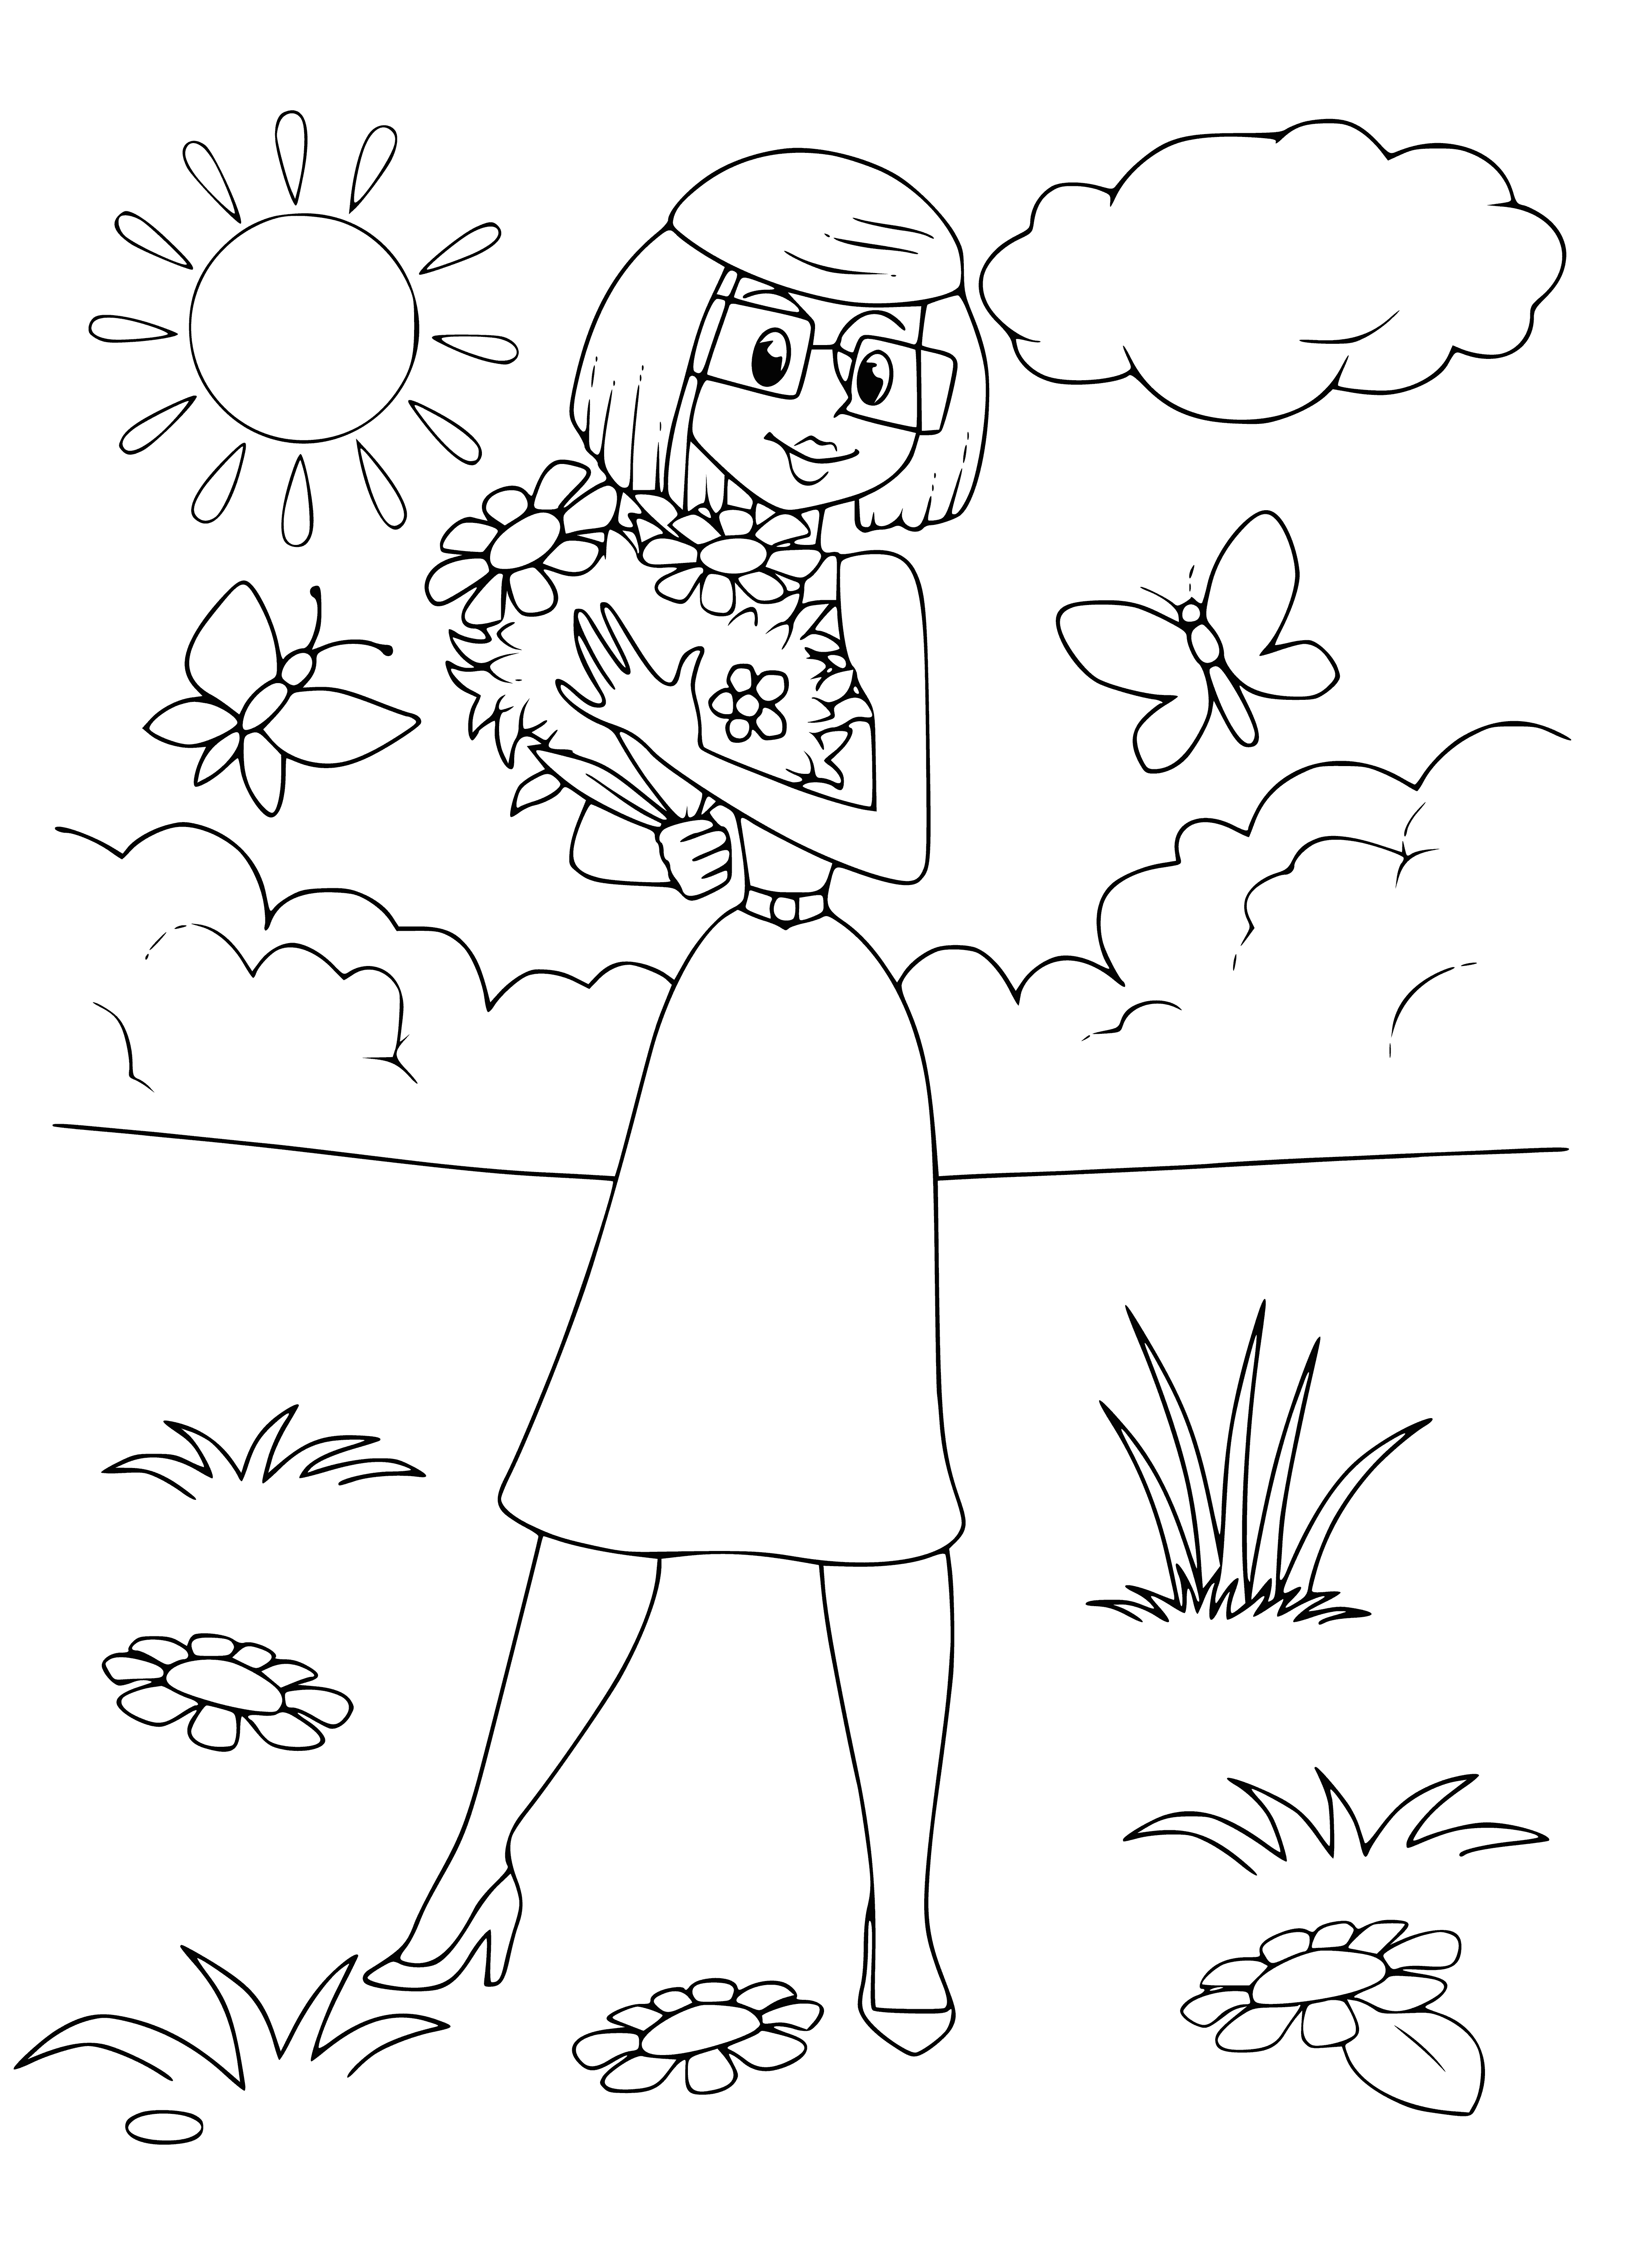 coloring page: Mom stands in kitchen wearing blue dress and apron with stove, table, cookies and tea. In her right hand she holds a spoon. #Prostokvashino